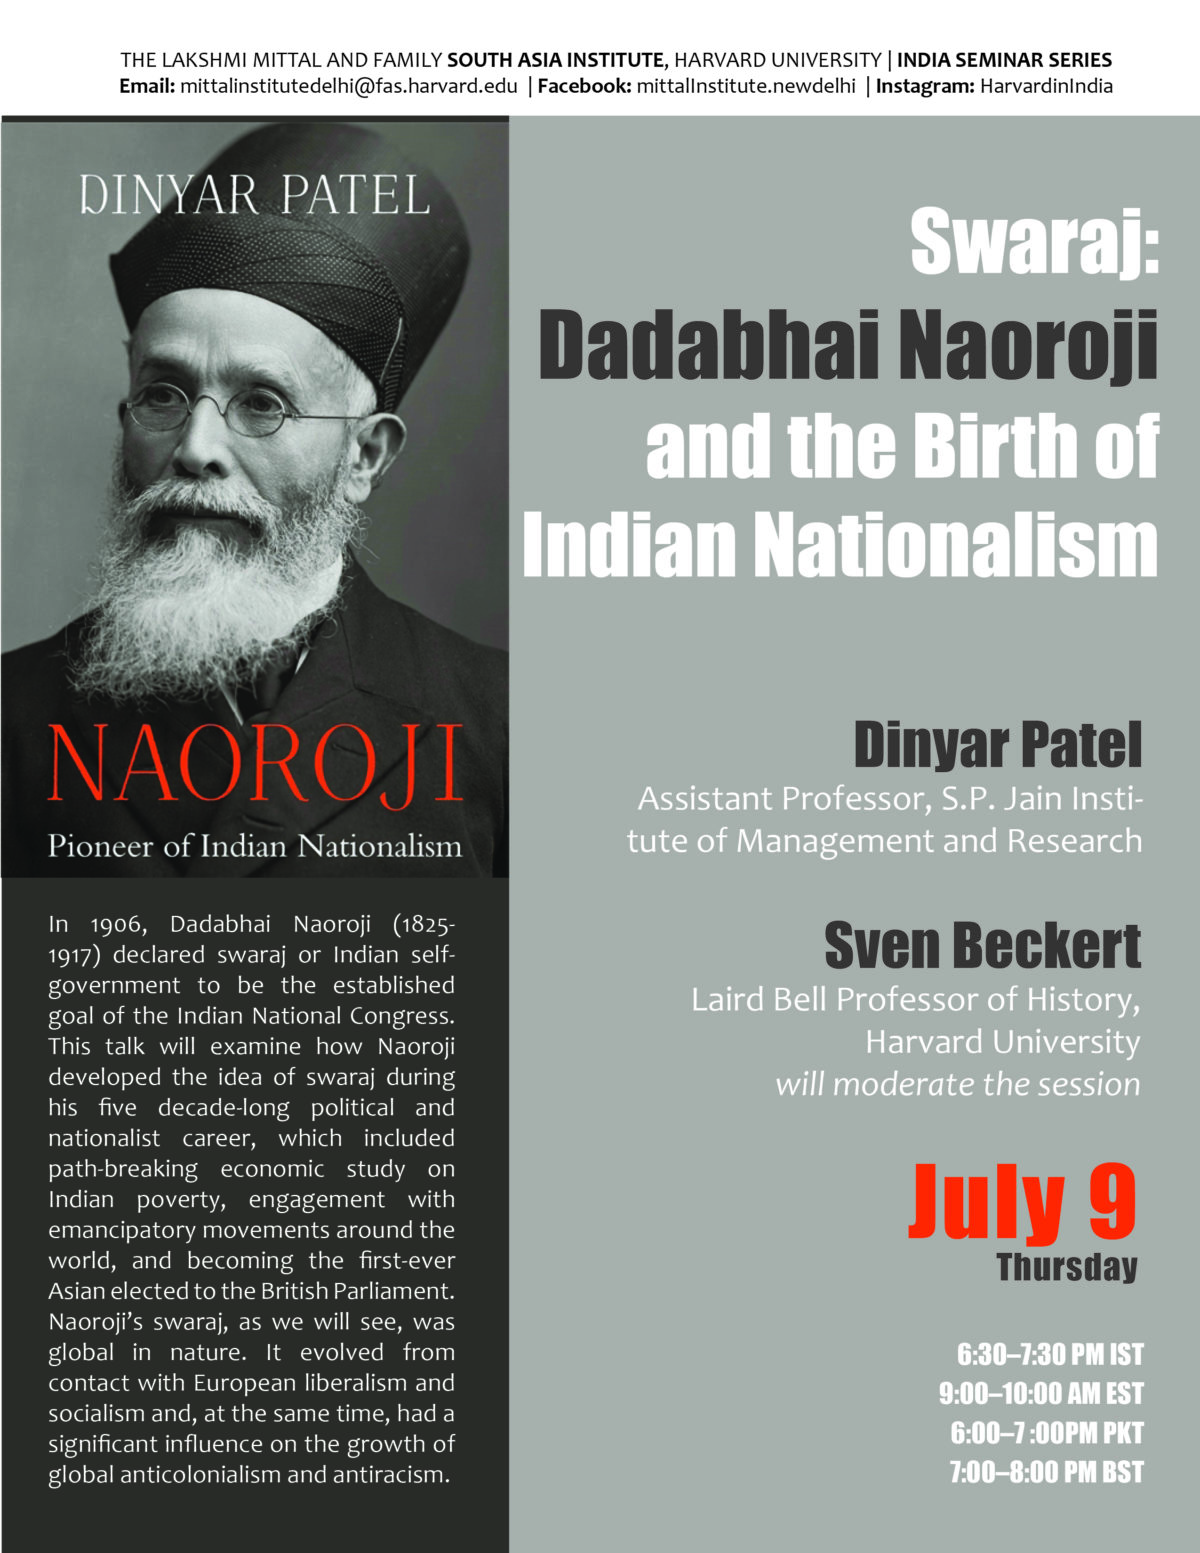 Swaraj: Dadabhai Naoroji and the Birth of Indian Nationalism • The Lakshmi  Mittal and Family South Asia Institute